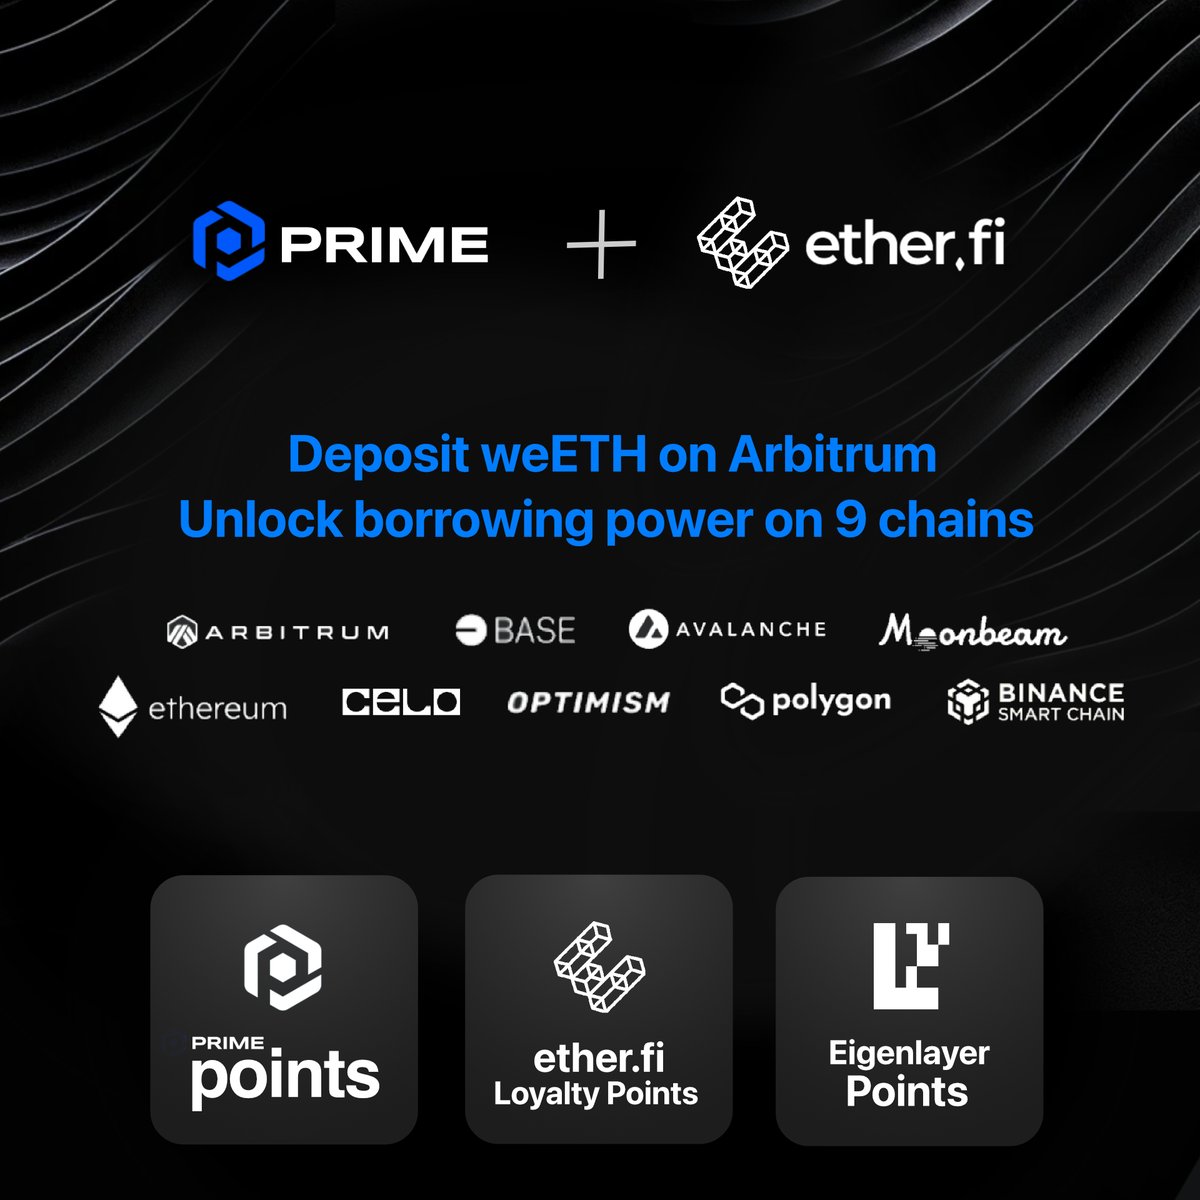 Introducing weETH from @ether_fi on @arbitrum on Prime Protocol 🤩 Deposit weETH into Prime and get Eigenlayer, ether.fi, AND Prime points. Plus, instantly unlock cross-chain borrowing power. We're just getting started with @ether_fi 👀 app.primeprotocol.xyz